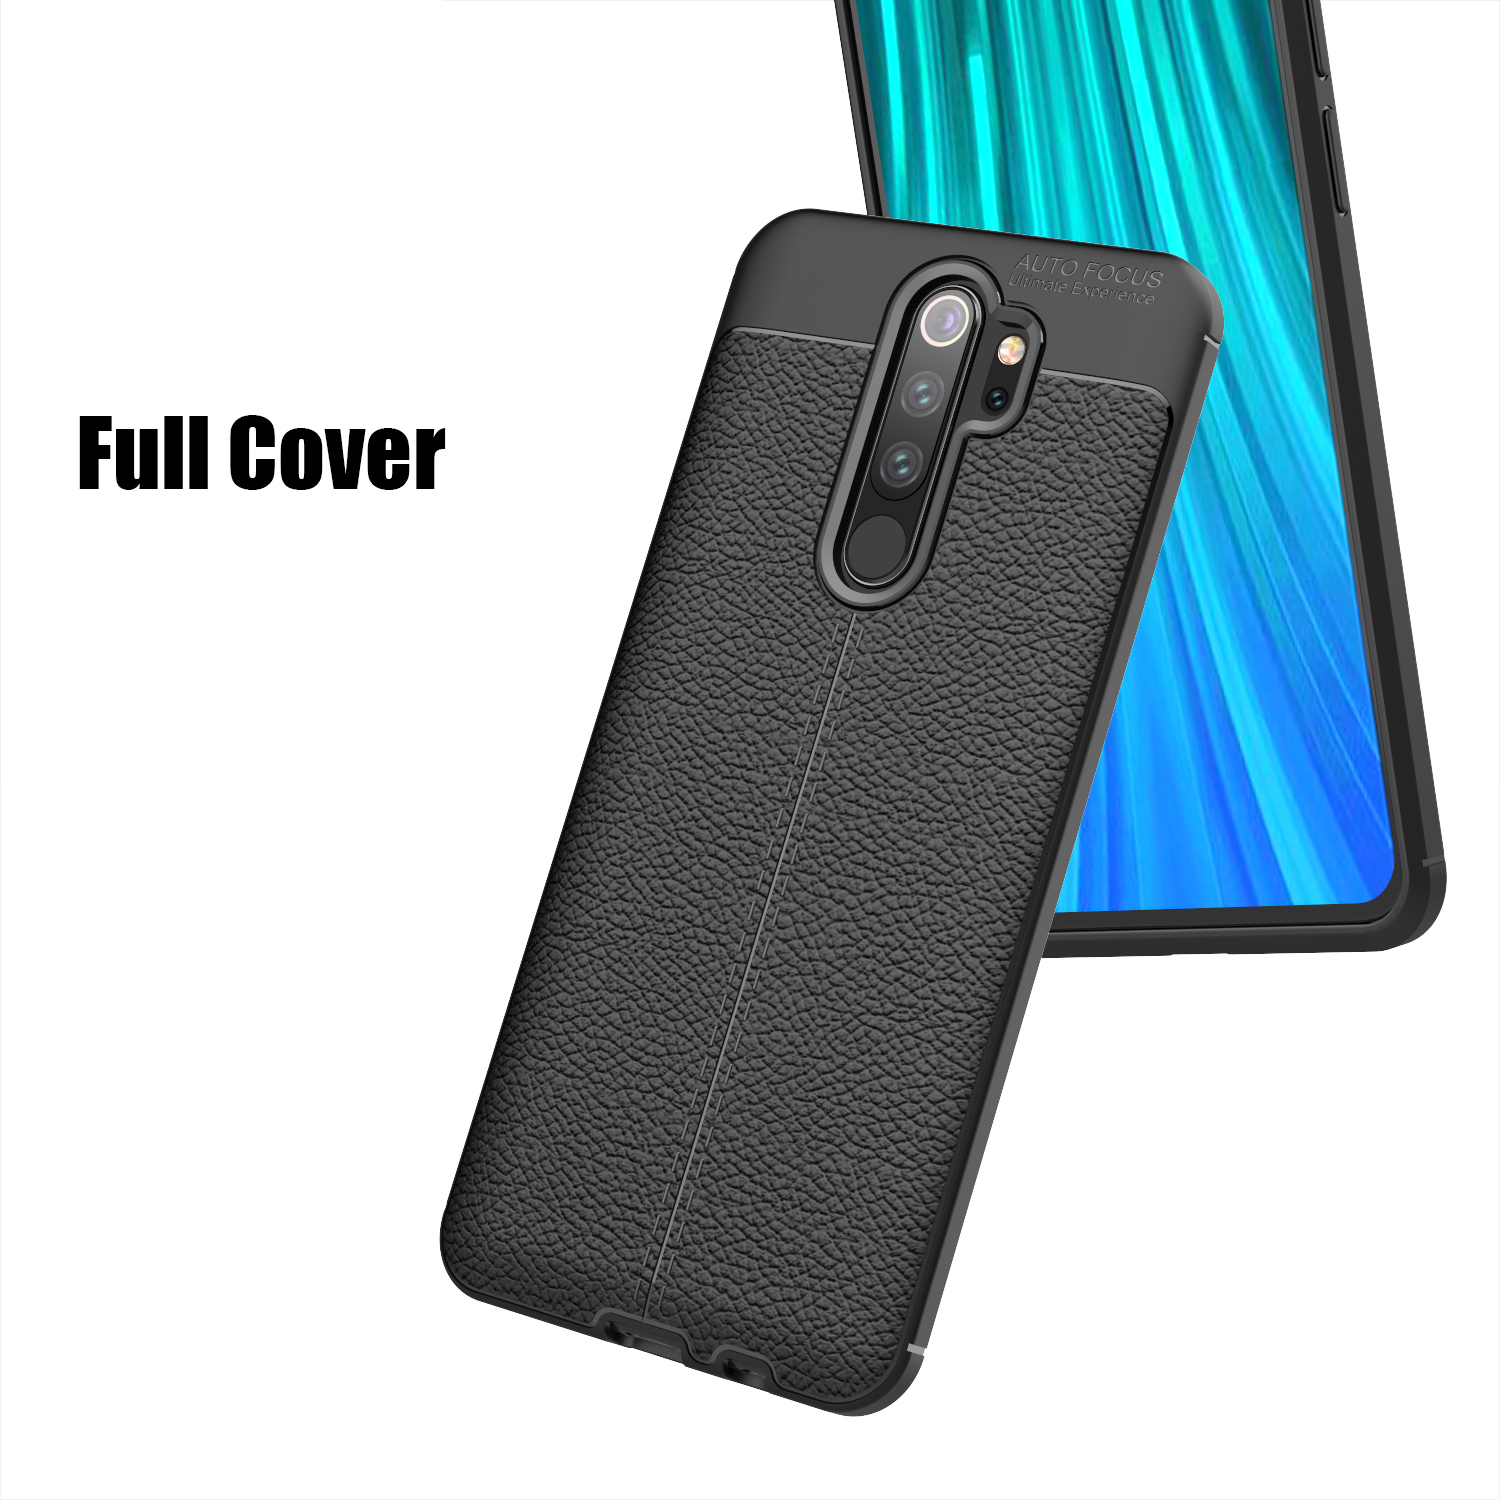 Bakeey-Xiaomi-Redmi-Note-8-Pro-Luxury-Litchi-Pattern-Shockproof-PU-Leather-Protective-Case-1588375-2